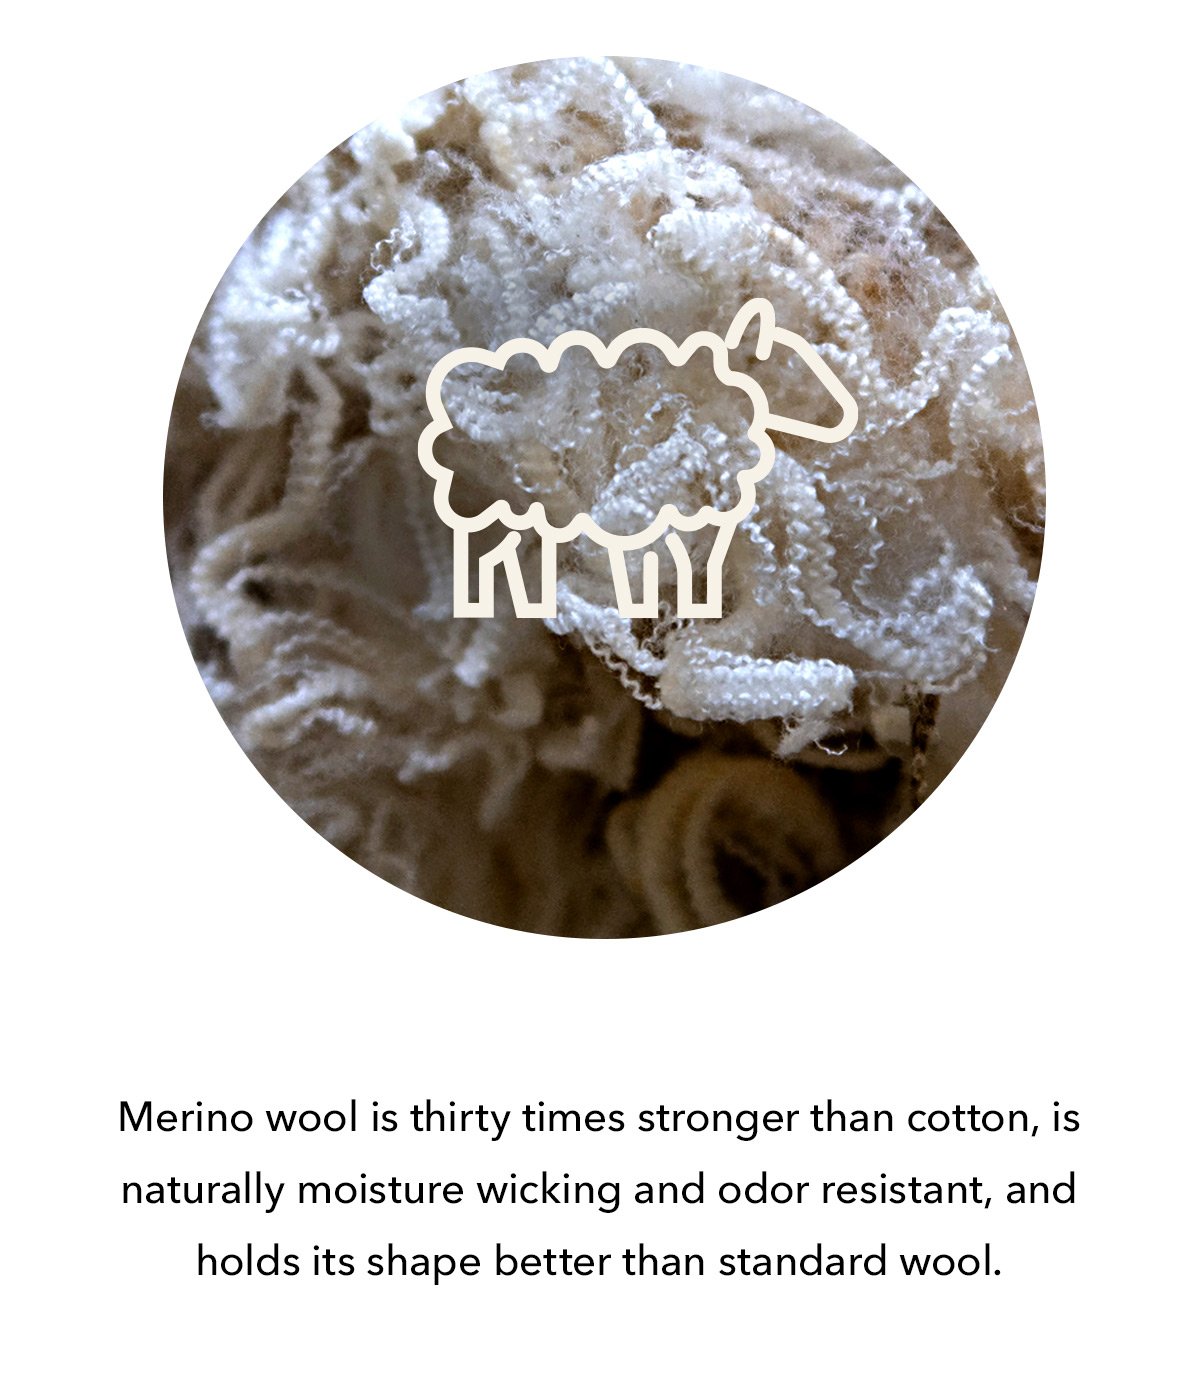 Merino wool is thirty times stronger than cotton, is naturally moisture wicking and odor resistant, and holds it shape better than standard wool.